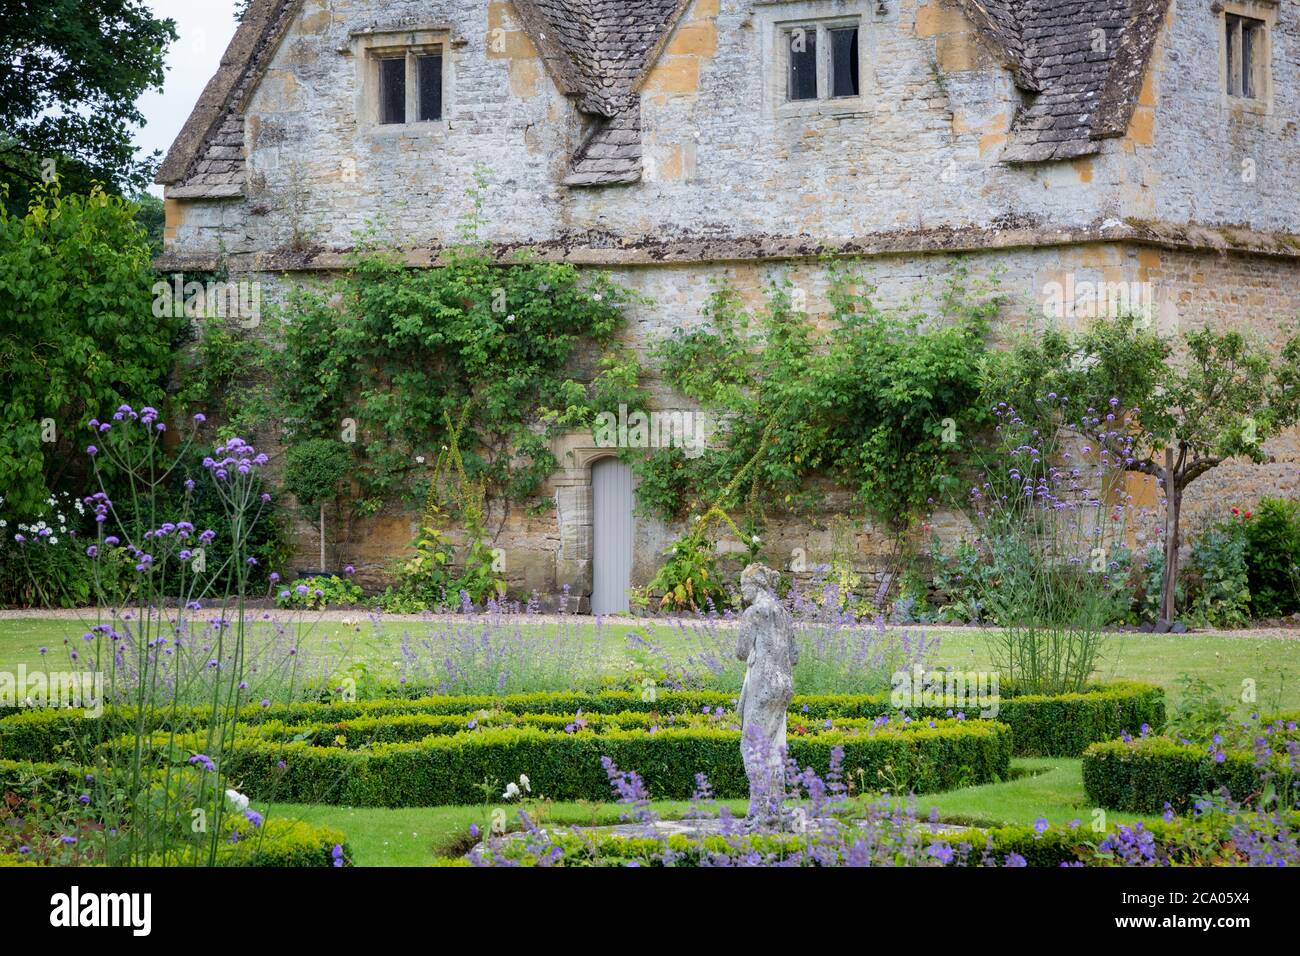 The Slaughters Manor House garden, Lower Slaughter,  Gloucestershire, England, UK Stock Photo